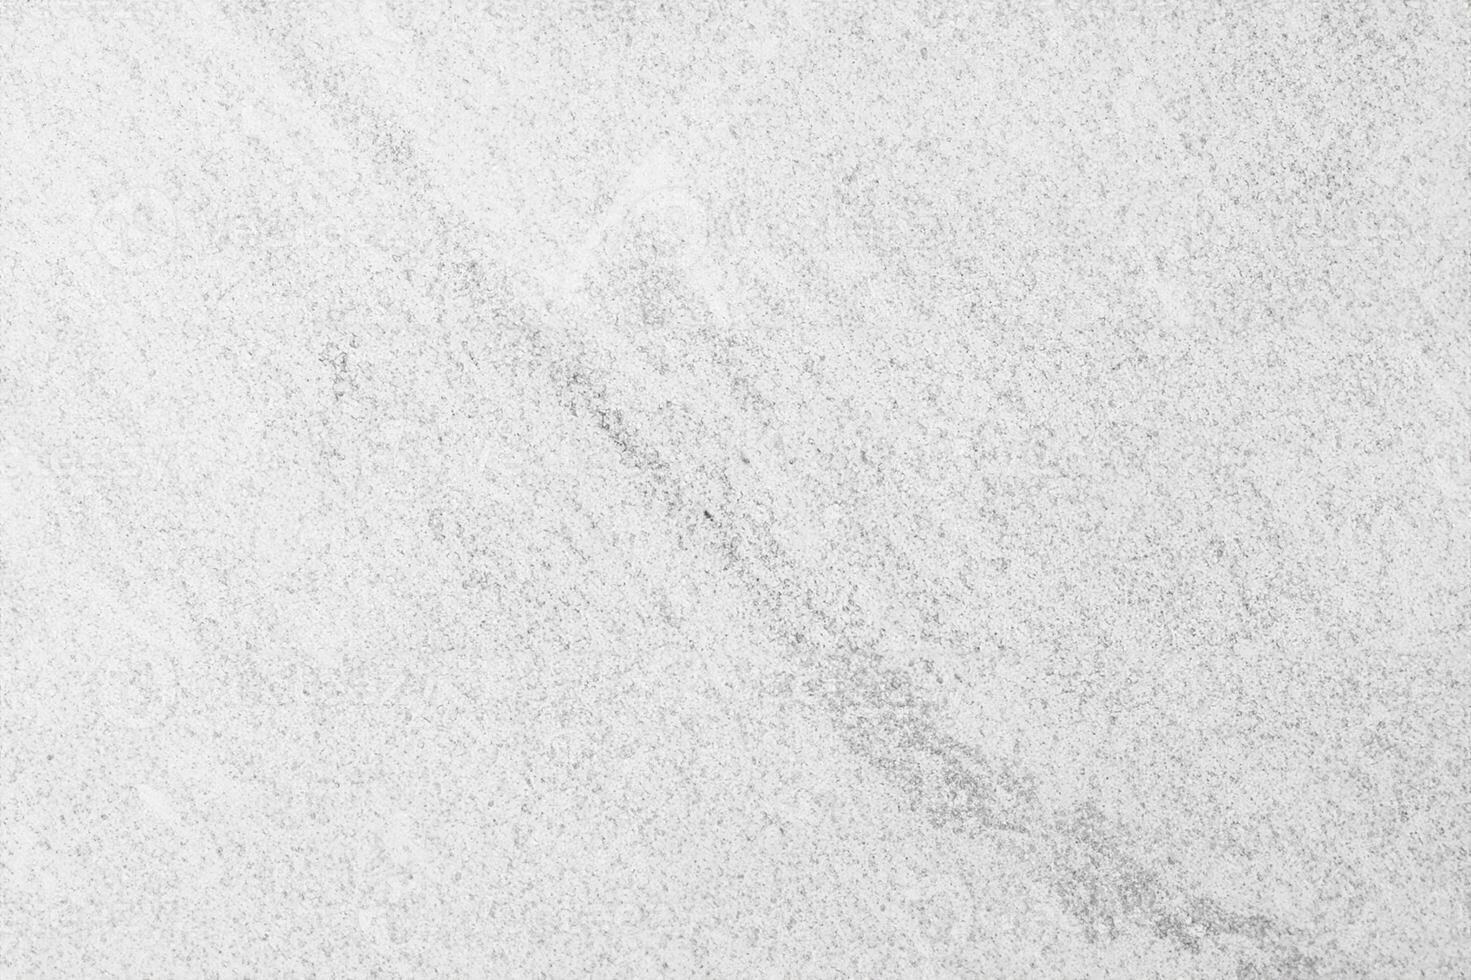 White Stone Textures, Ideal Backgrounds for Versatile Design Projects. photo